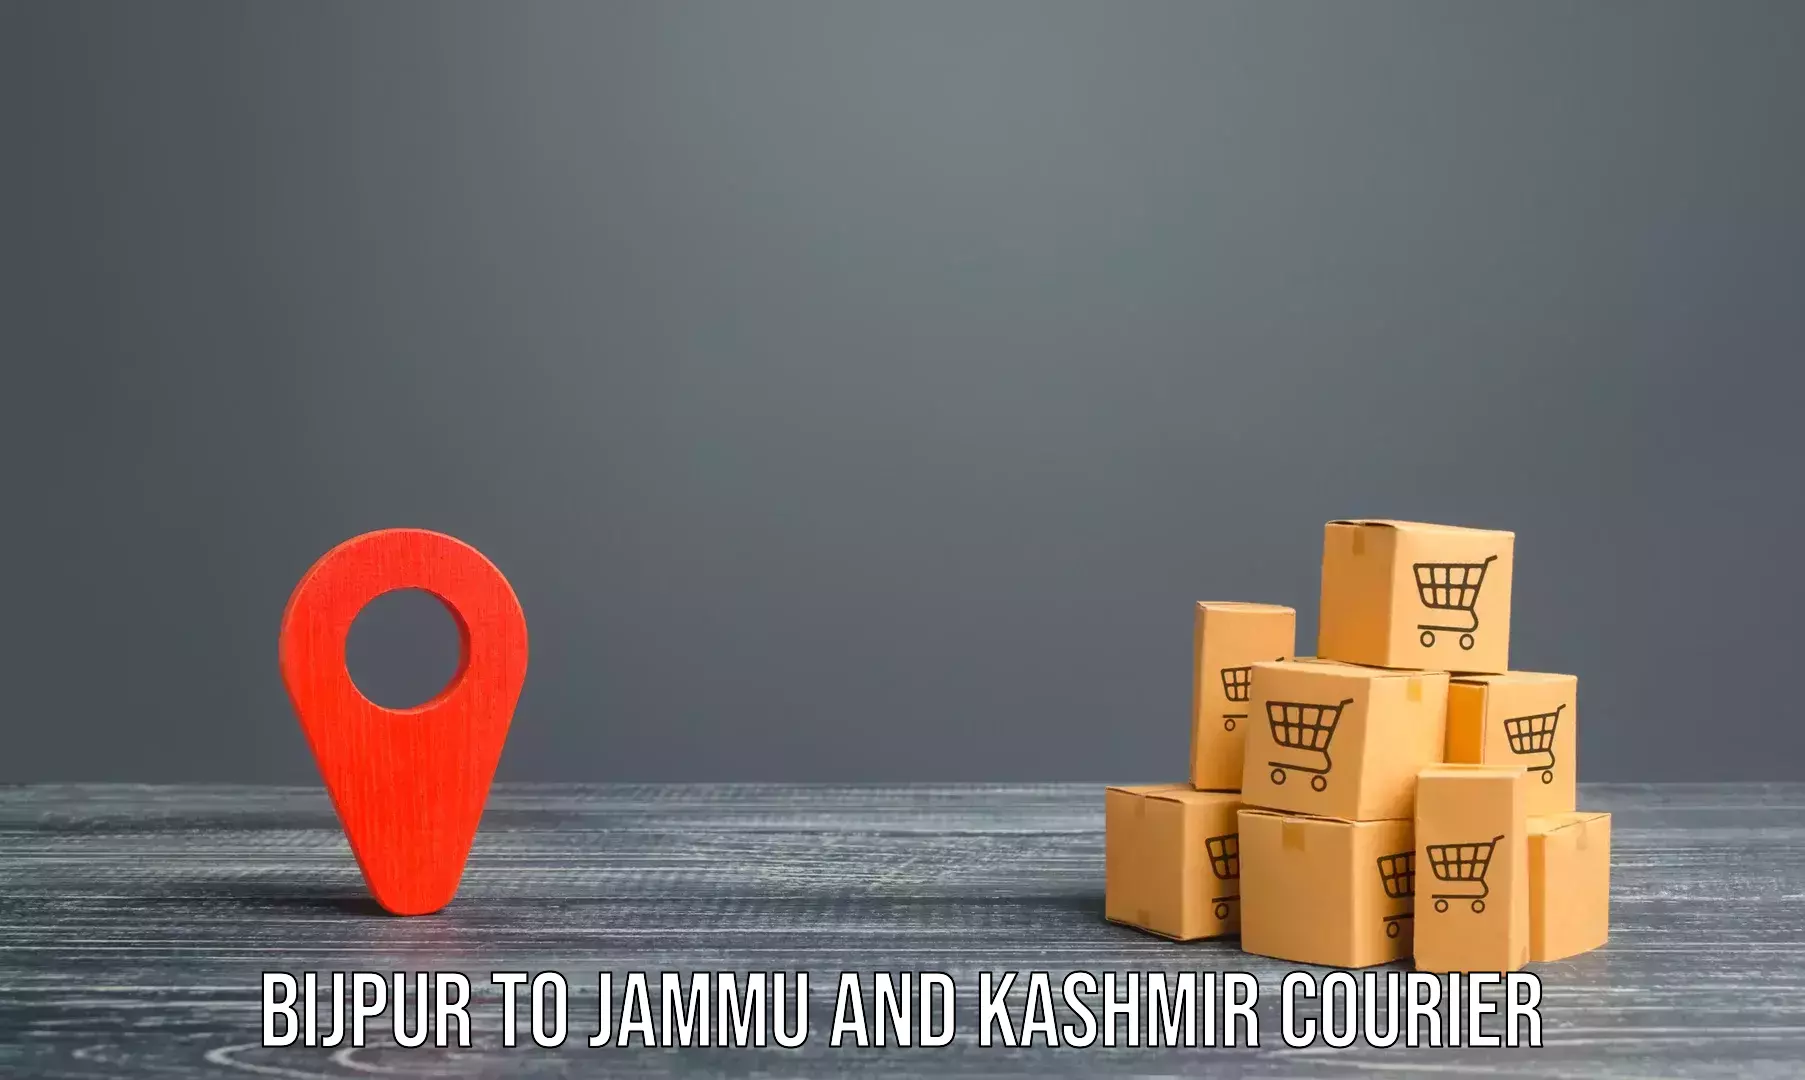 Furniture moving specialists Bijpur to Baramulla